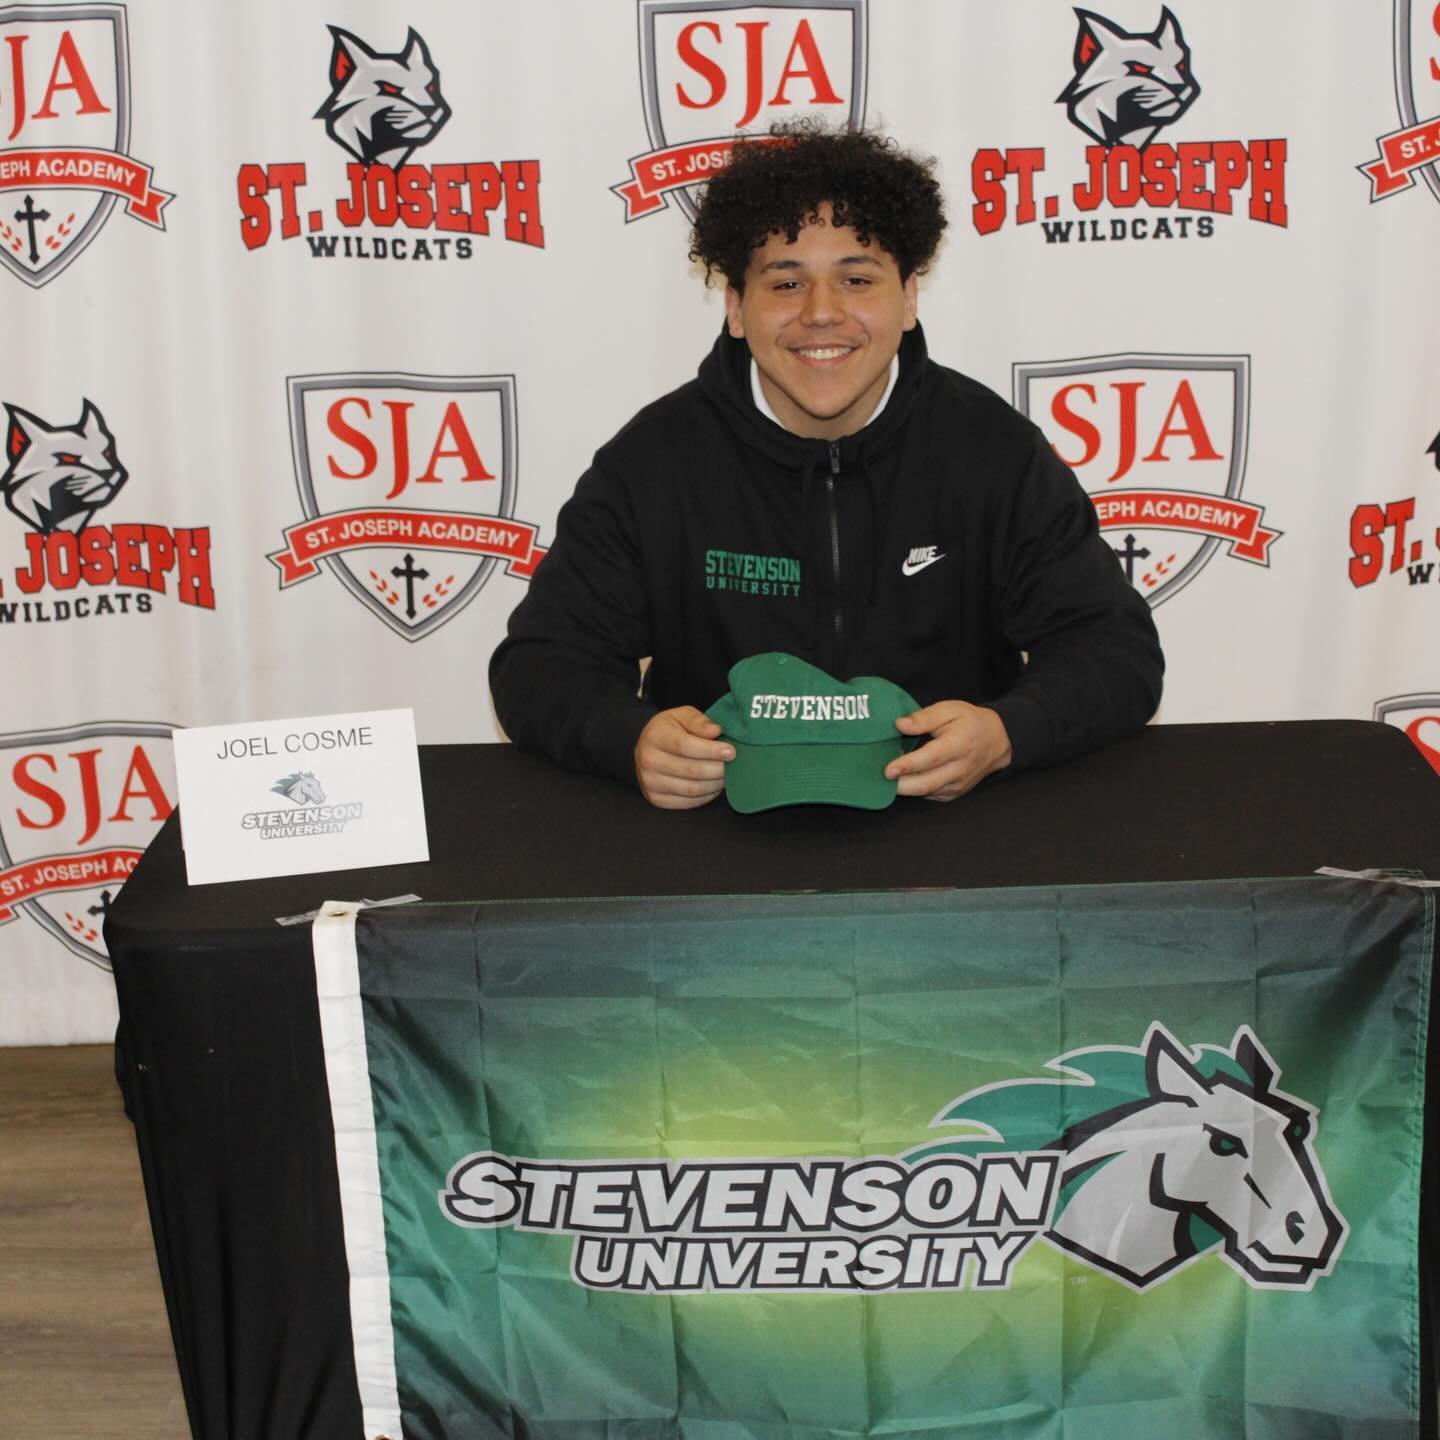 Congratulations to Joel Cosme who signed his National Letter of Intent to continue his academic and athletic career at Stevenson University! #FaithFamilyFuture